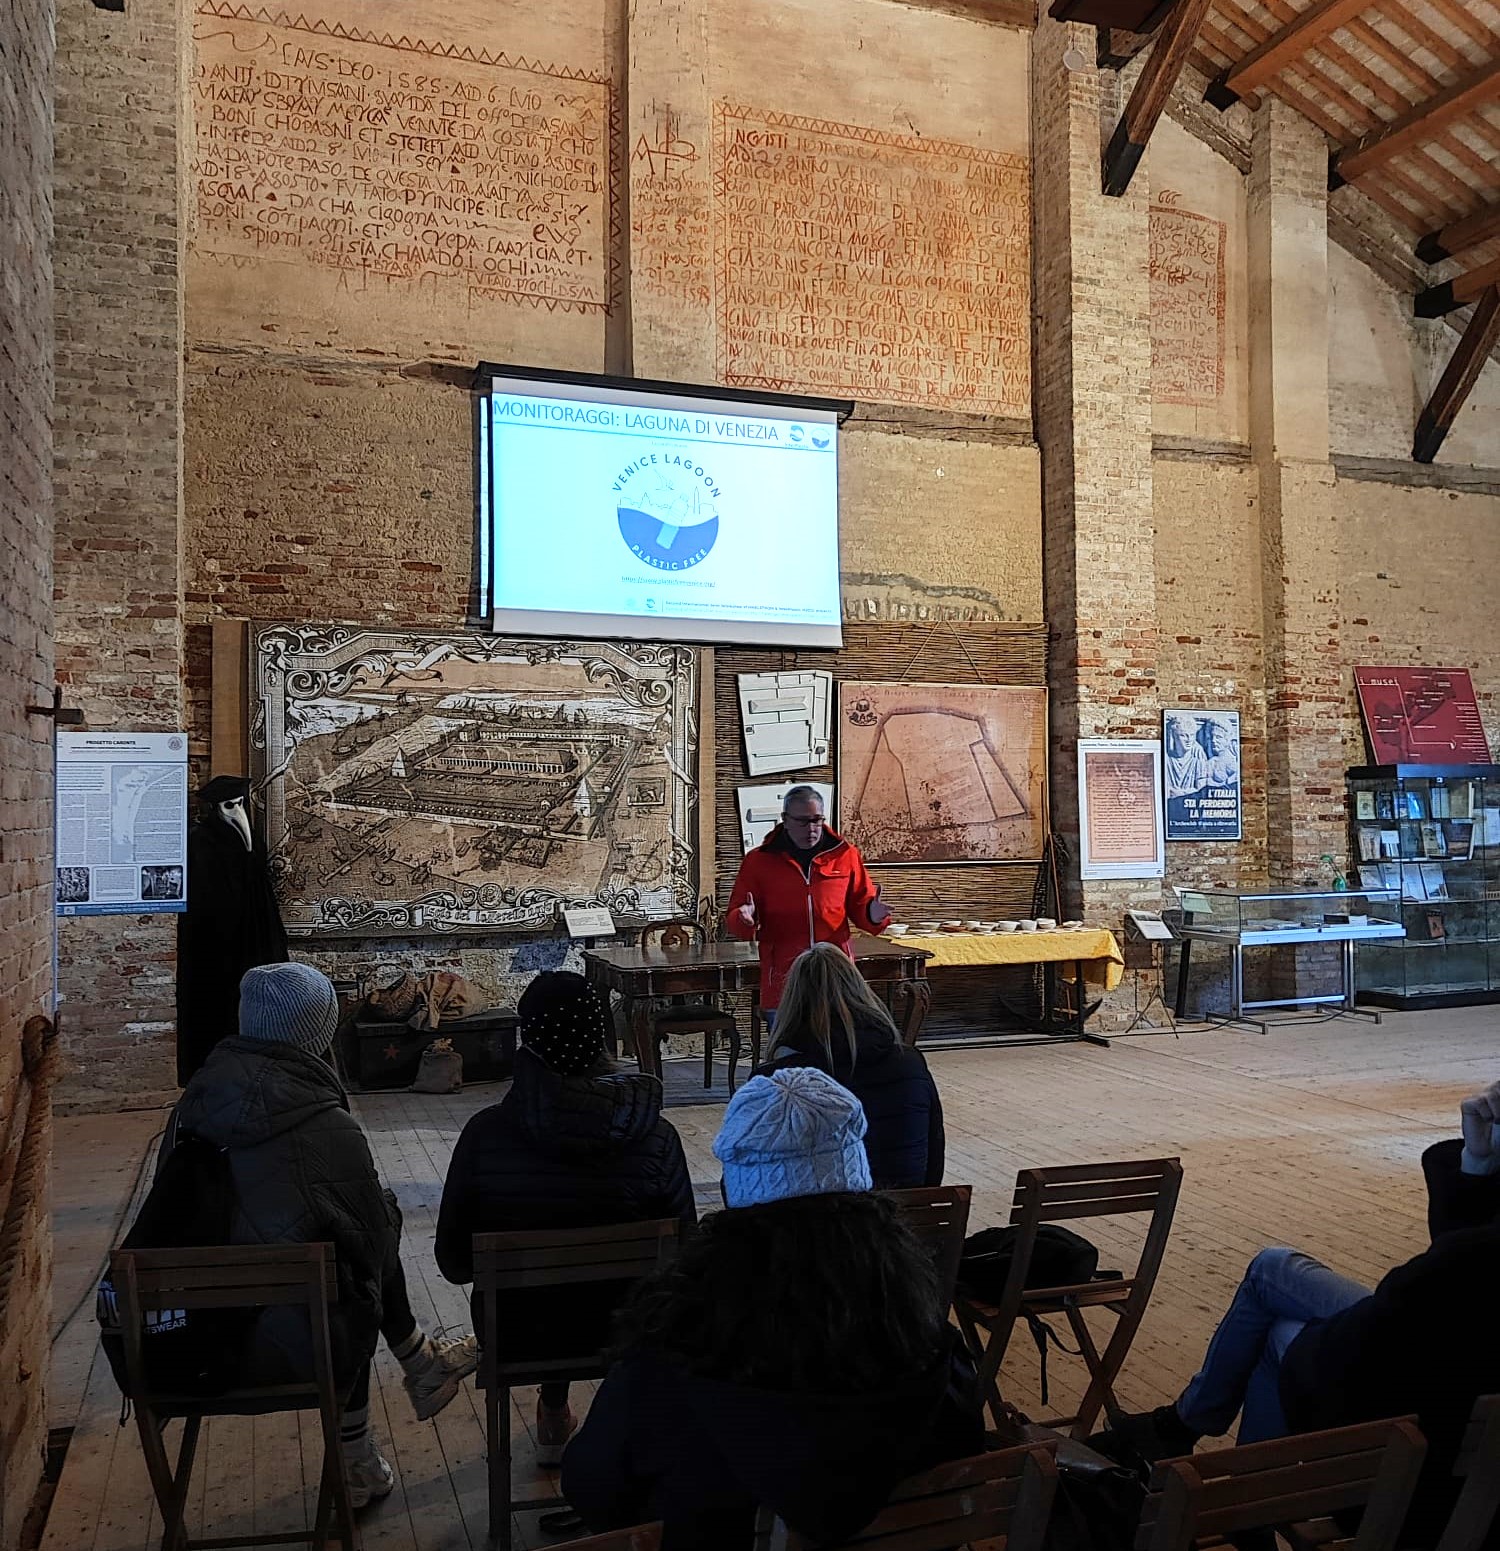 VLPF shares the results of the monitoring of macroplastics on the island of Lazzaretto Nuovo in collaboration with the INTERREG Hatch project